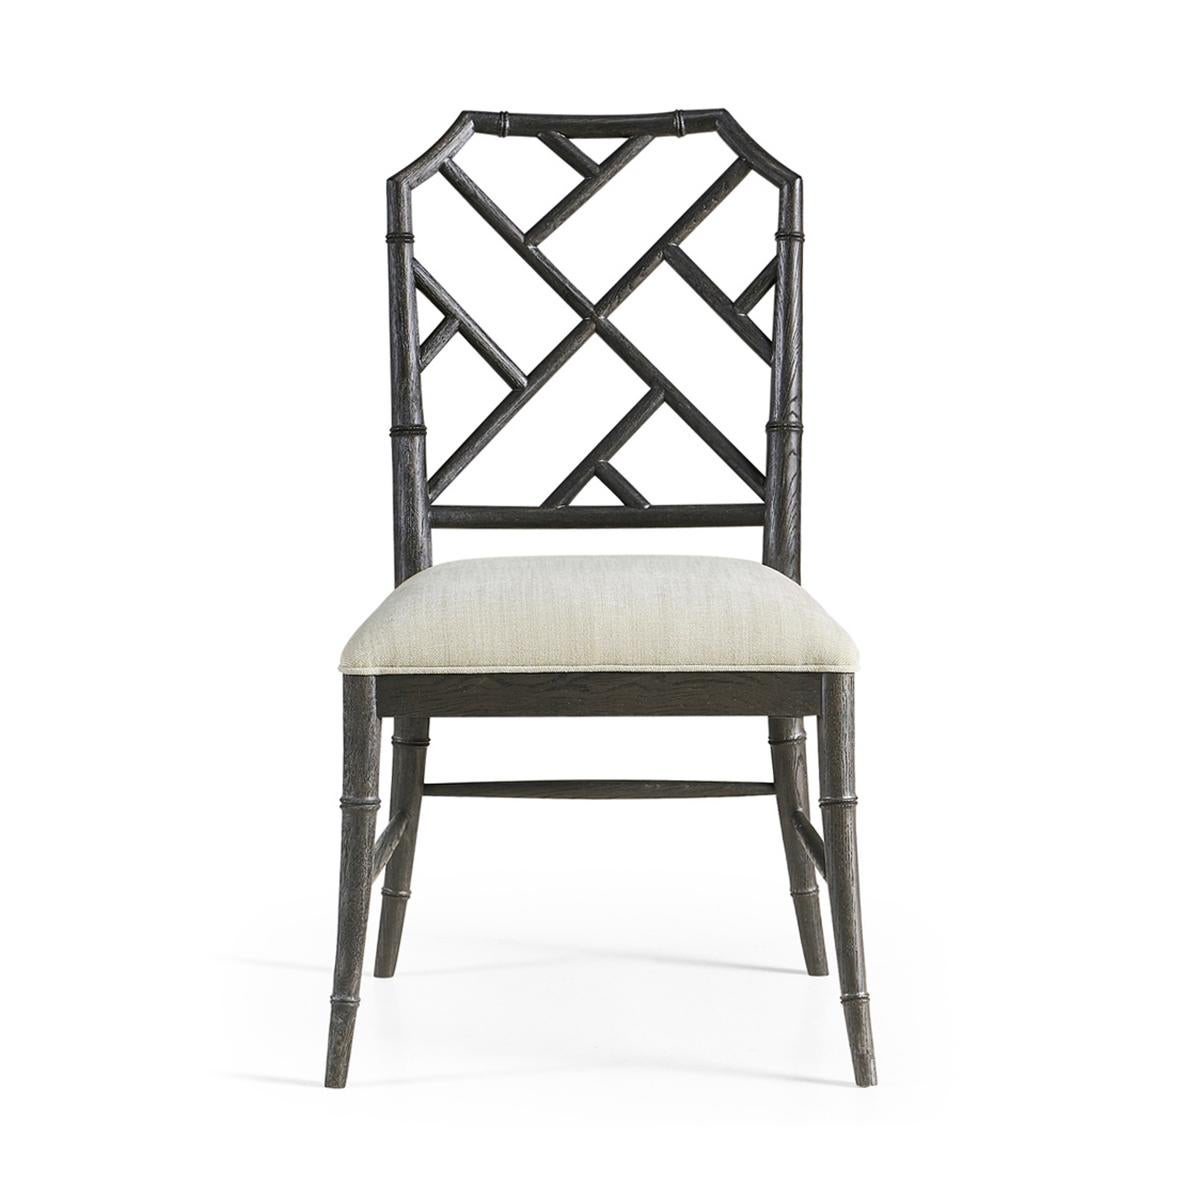 Chippendale bamboo dining chair, this timeless geometric design lattice back bamboo formed dining side chair in an ebonized finish with light distressing. Upholstered in earthy oatmeal performance fabric, the chairs will add comfort and intrigue to